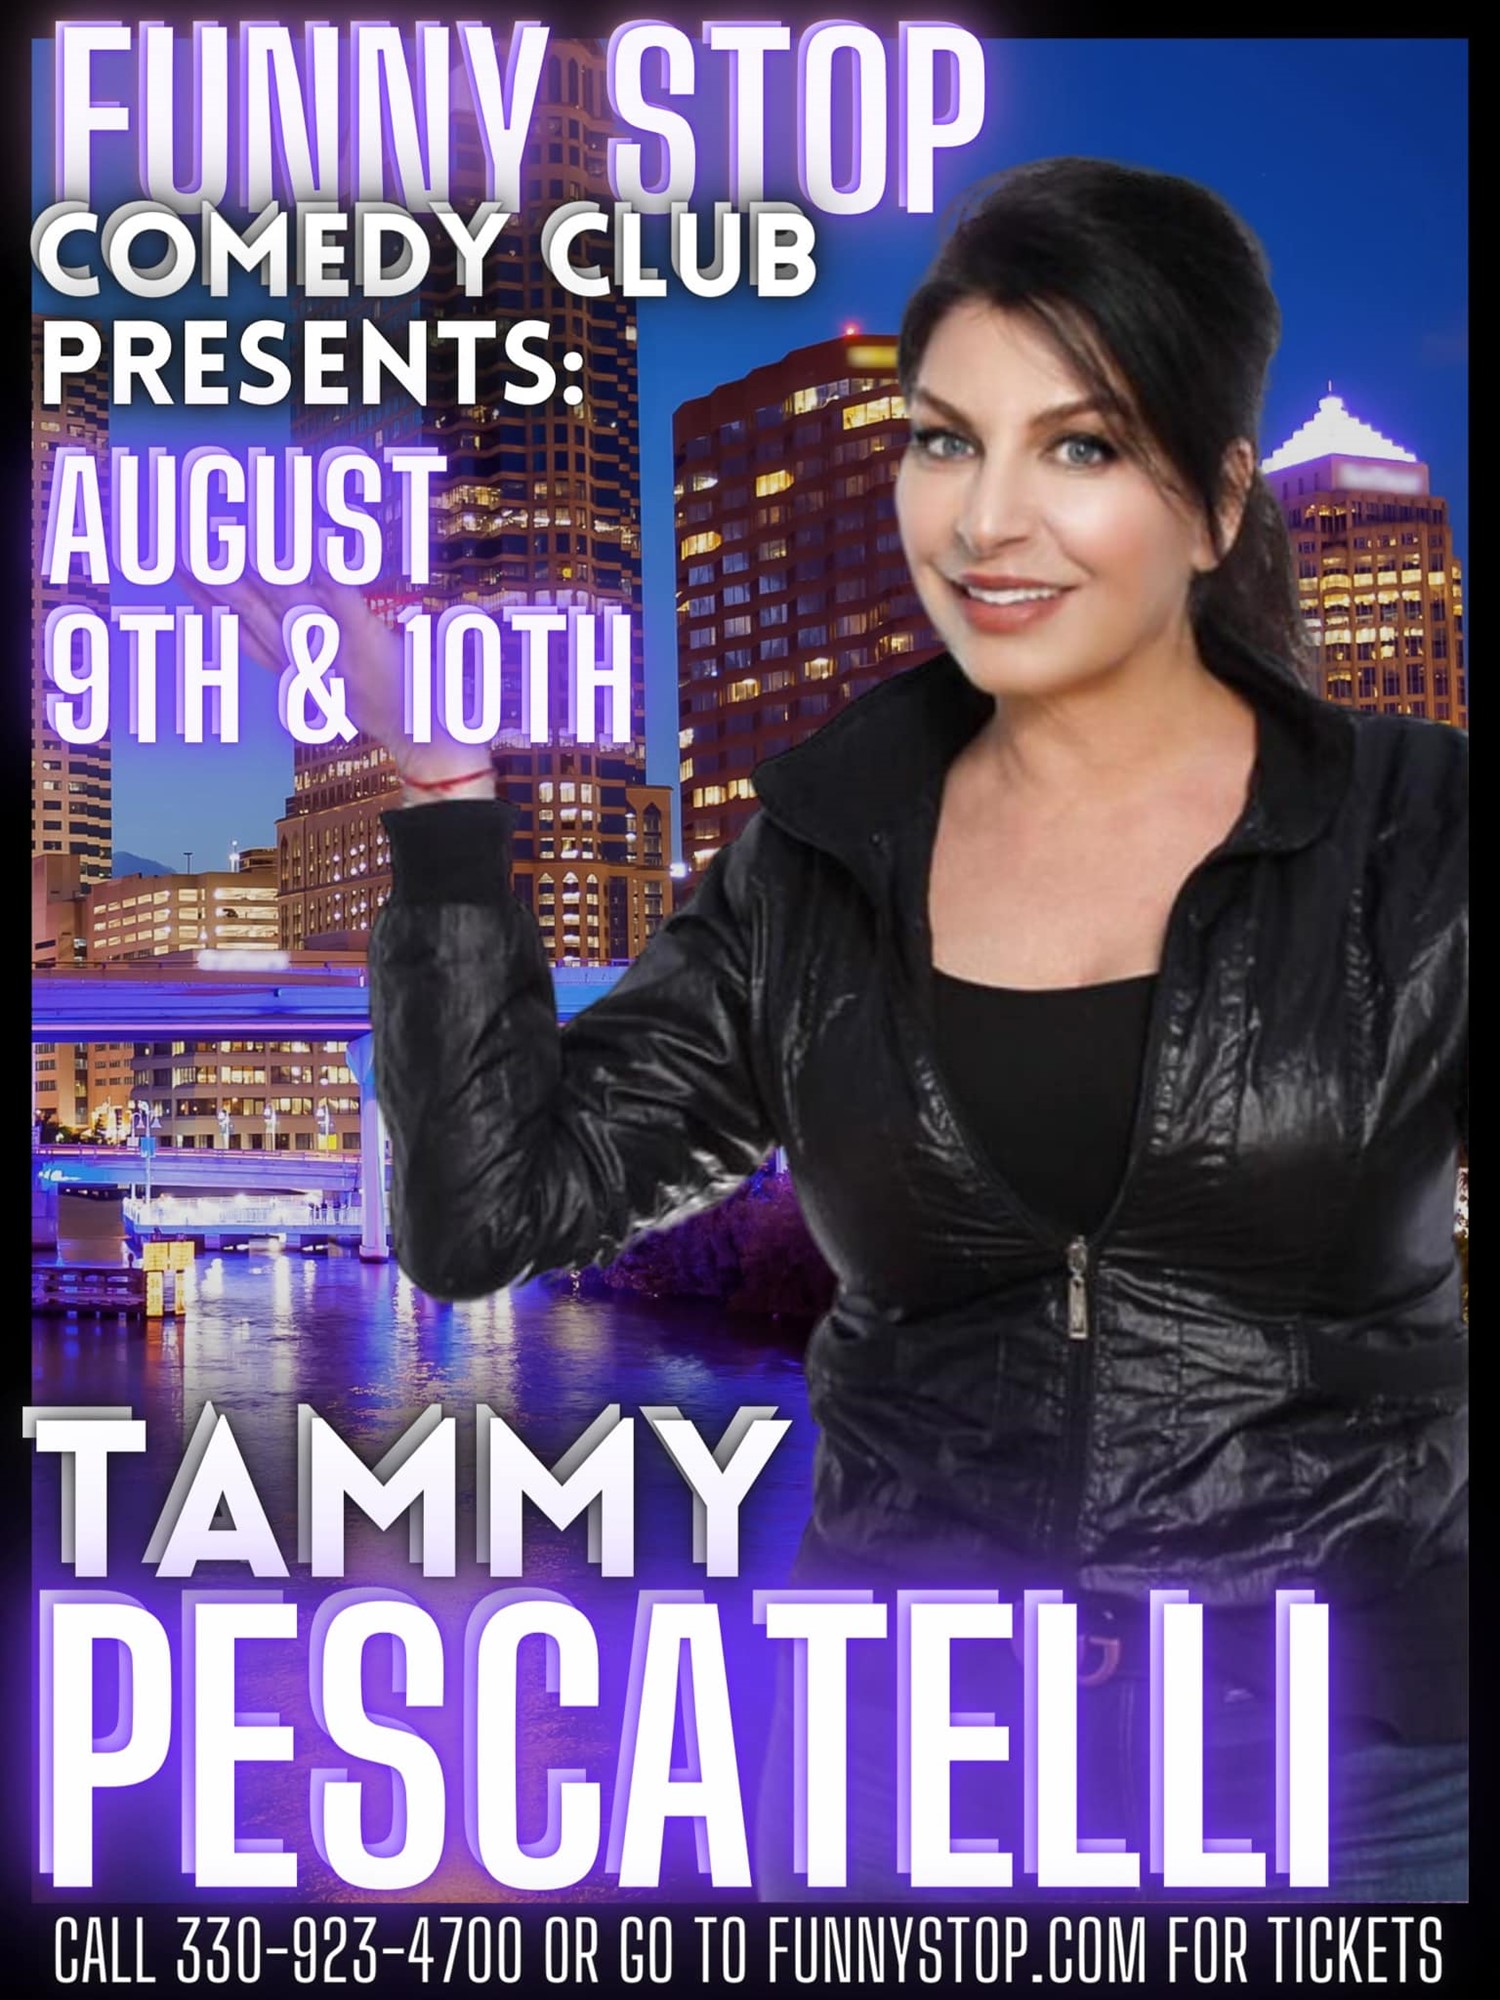 Tammy Pescatelli - Fri. 7:30 Show Funny Stop Comedy Club on Aug 09, 19:30@Funny Stop Comedy Club - Buy tickets and Get information on Funny Stop funnystop.online